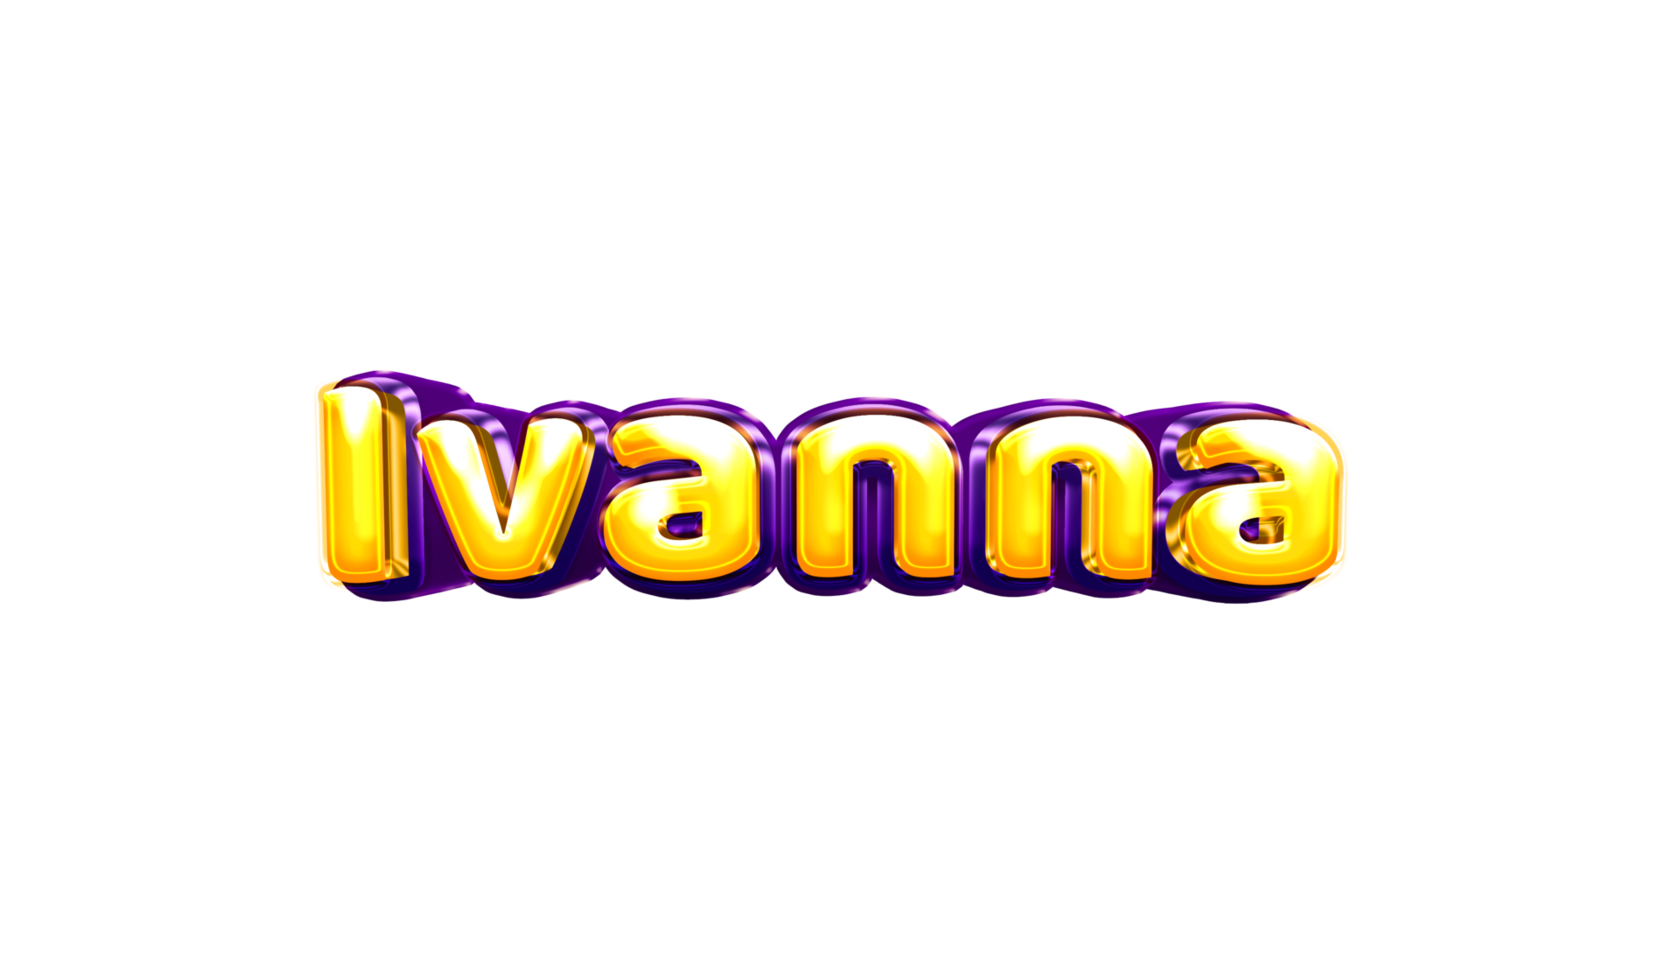 girls name sticker colorful party balloon birthday helium air shiny yellow purple cutout Ivanna png